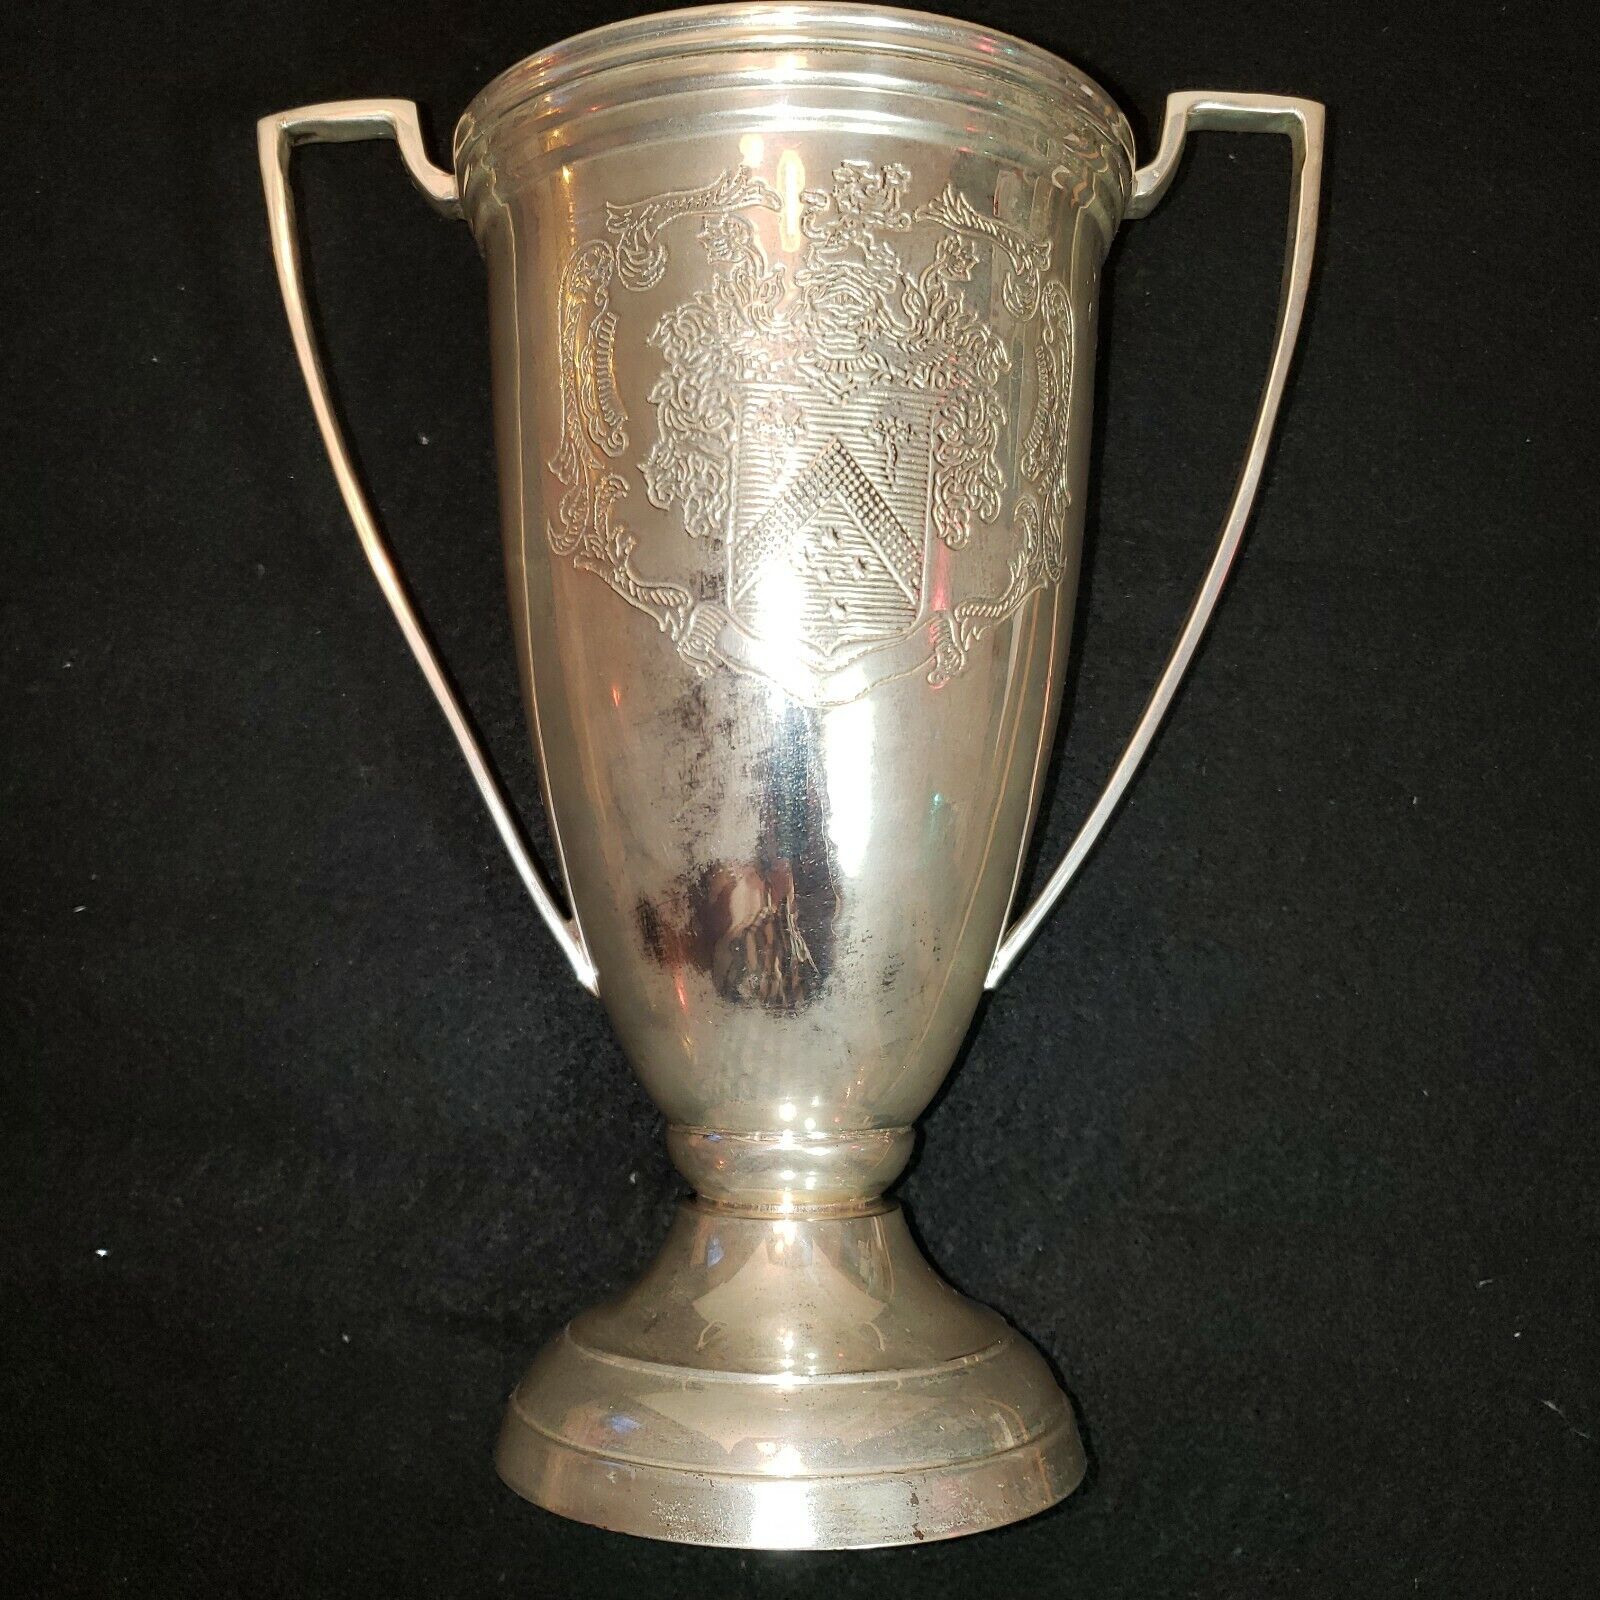 VTG Loving Cup Trophy 10" Tall 8" Wide Embossed Double Handled Weighs 1LB 9OZ